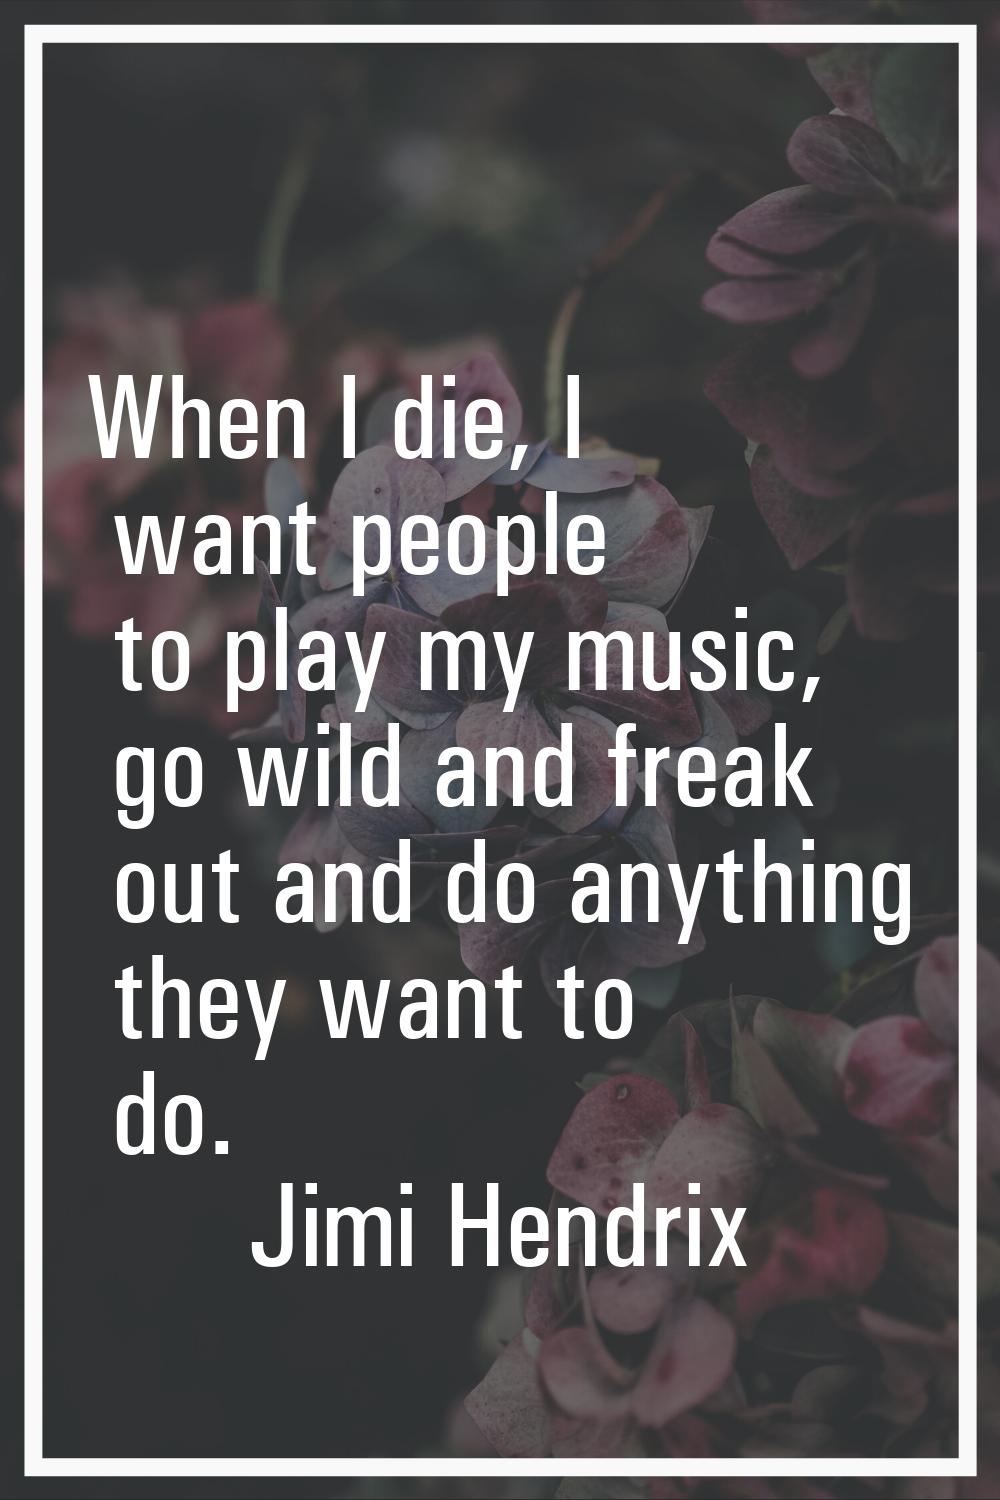 When I die, I want people to play my music, go wild and freak out and do anything they want to do.